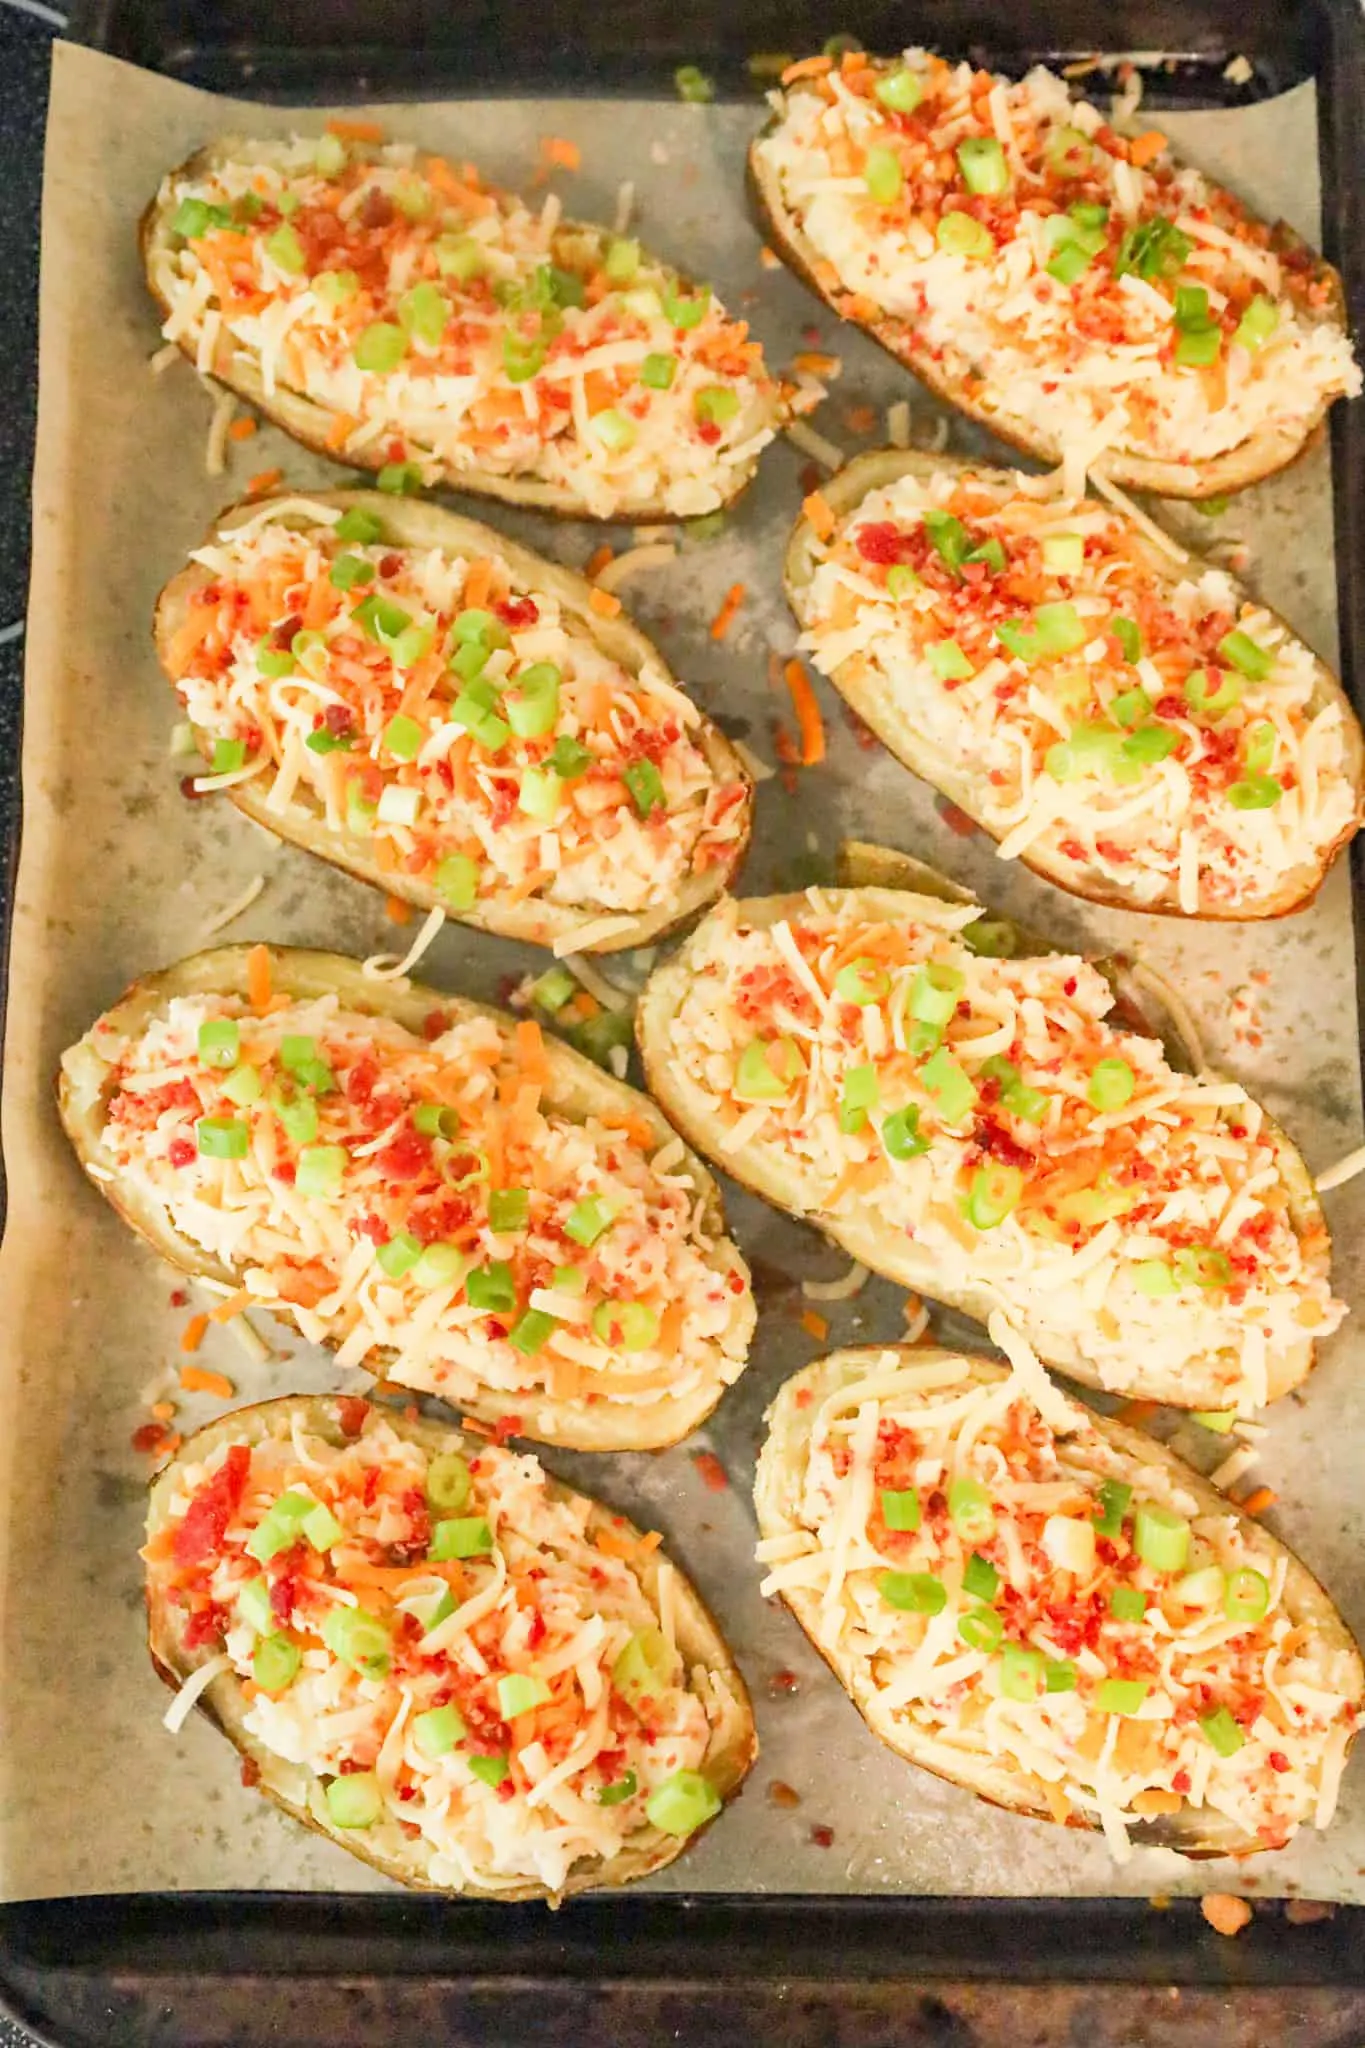 chopped green onions, crumbled bacon and cheese on top of mashed potato in potato skins